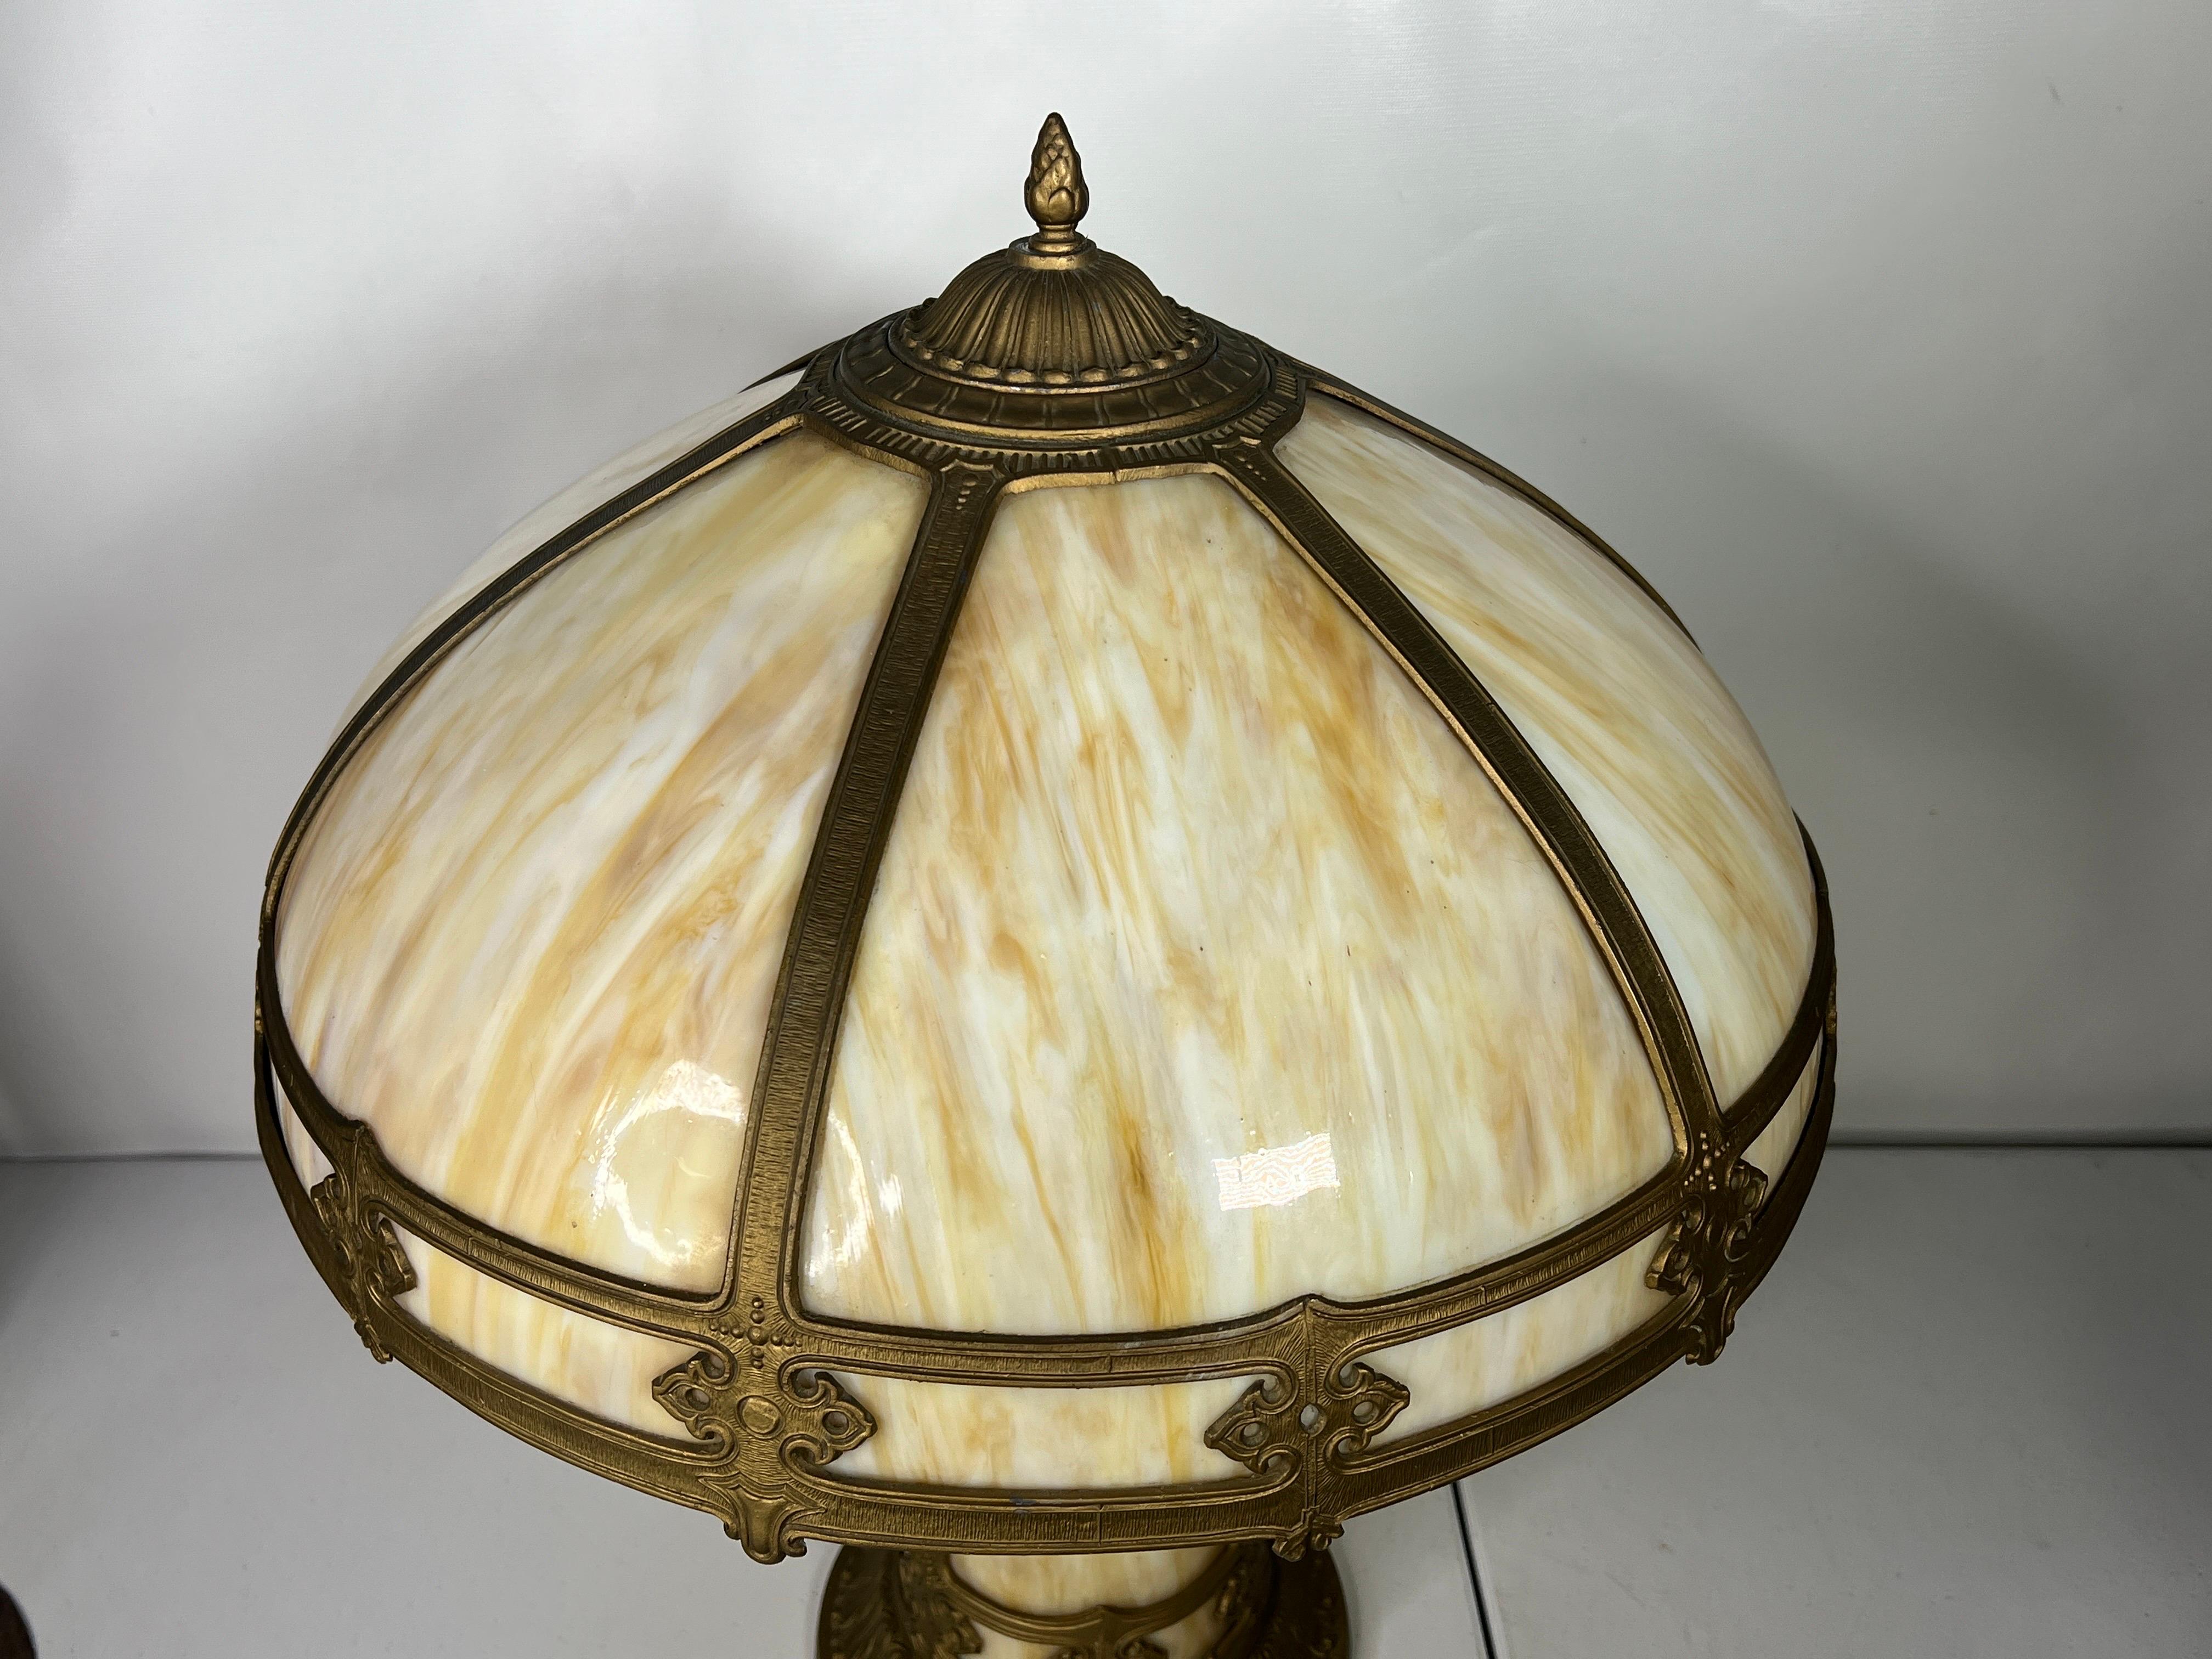 This is an absolutely stunning antique art nouveau slag glass lamp, that is all original.